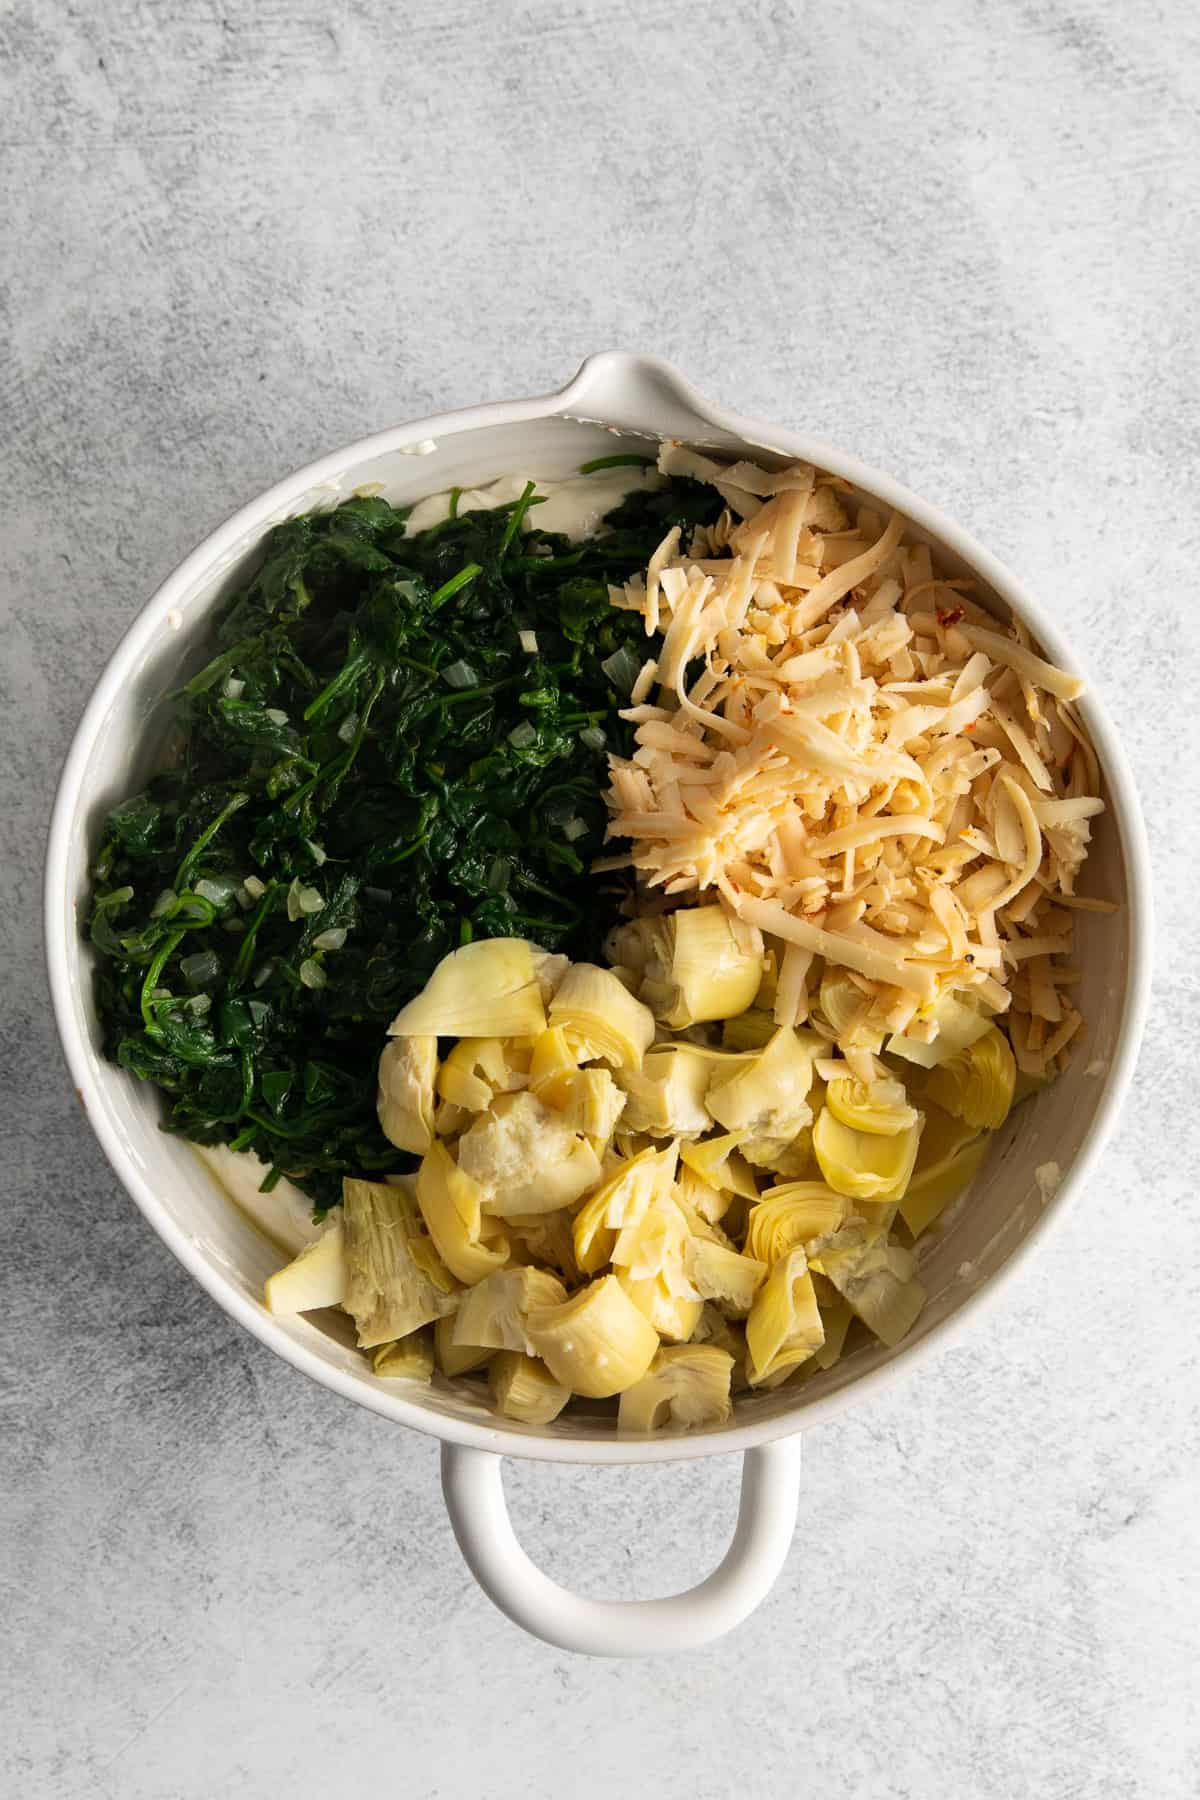 Spinach artichoke dip ingredients in a bowl.